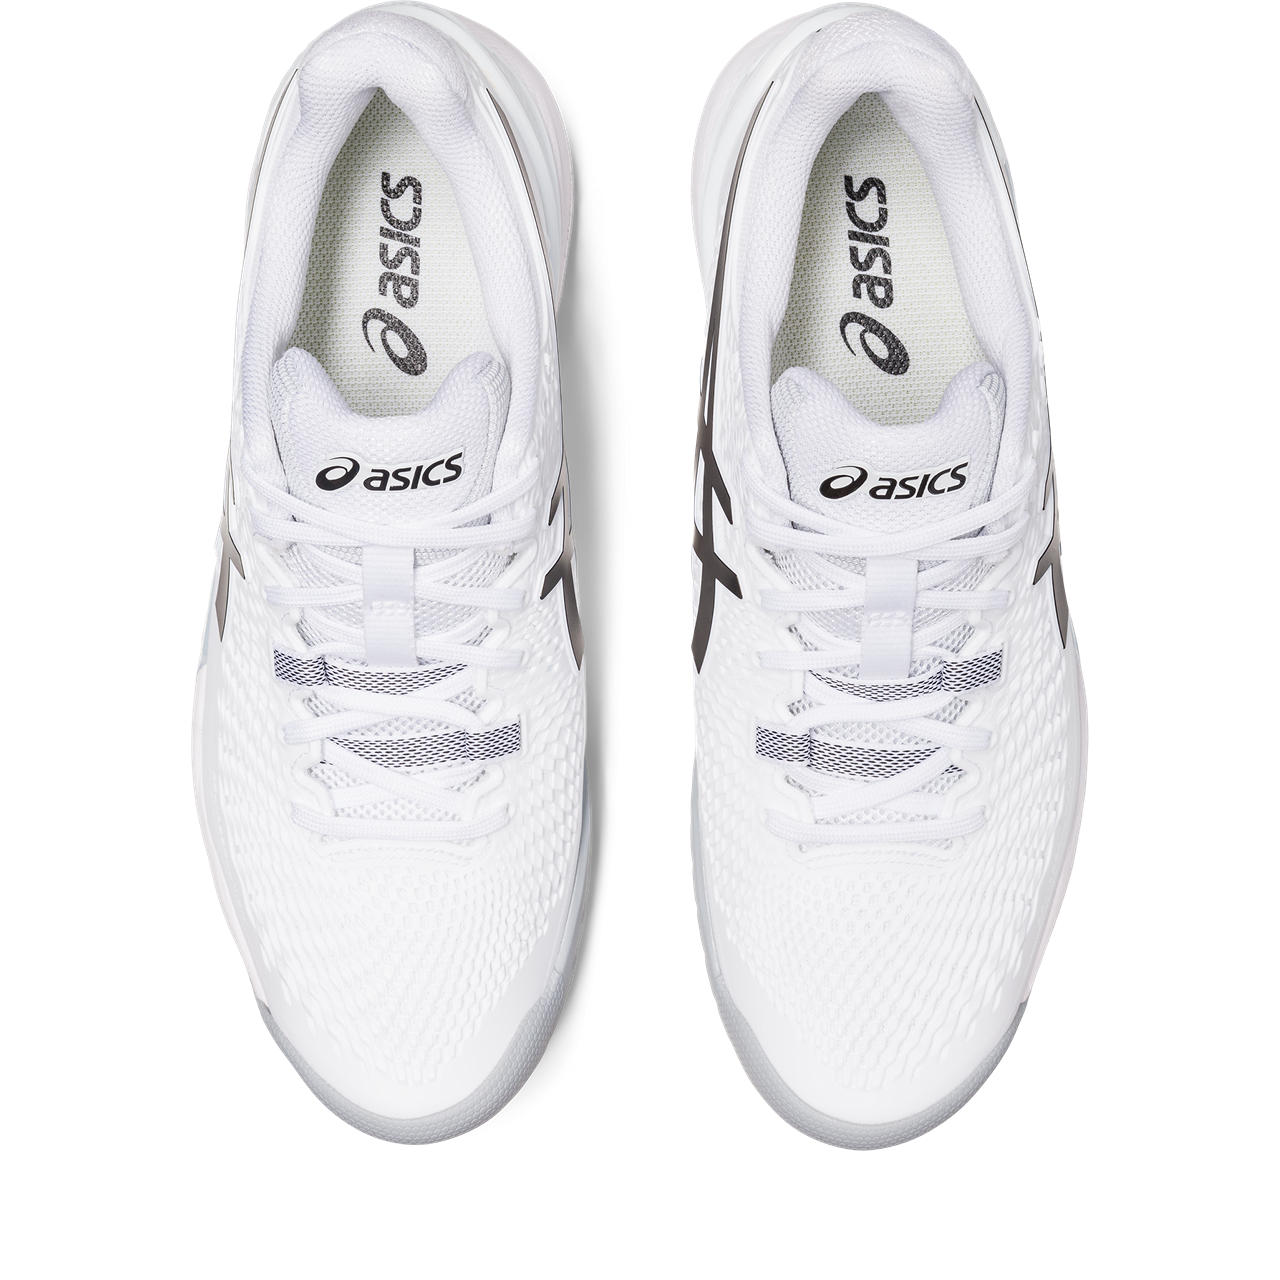 Top view of the ASIC Men's Resolution 9 tennis shoe in the color White/Black